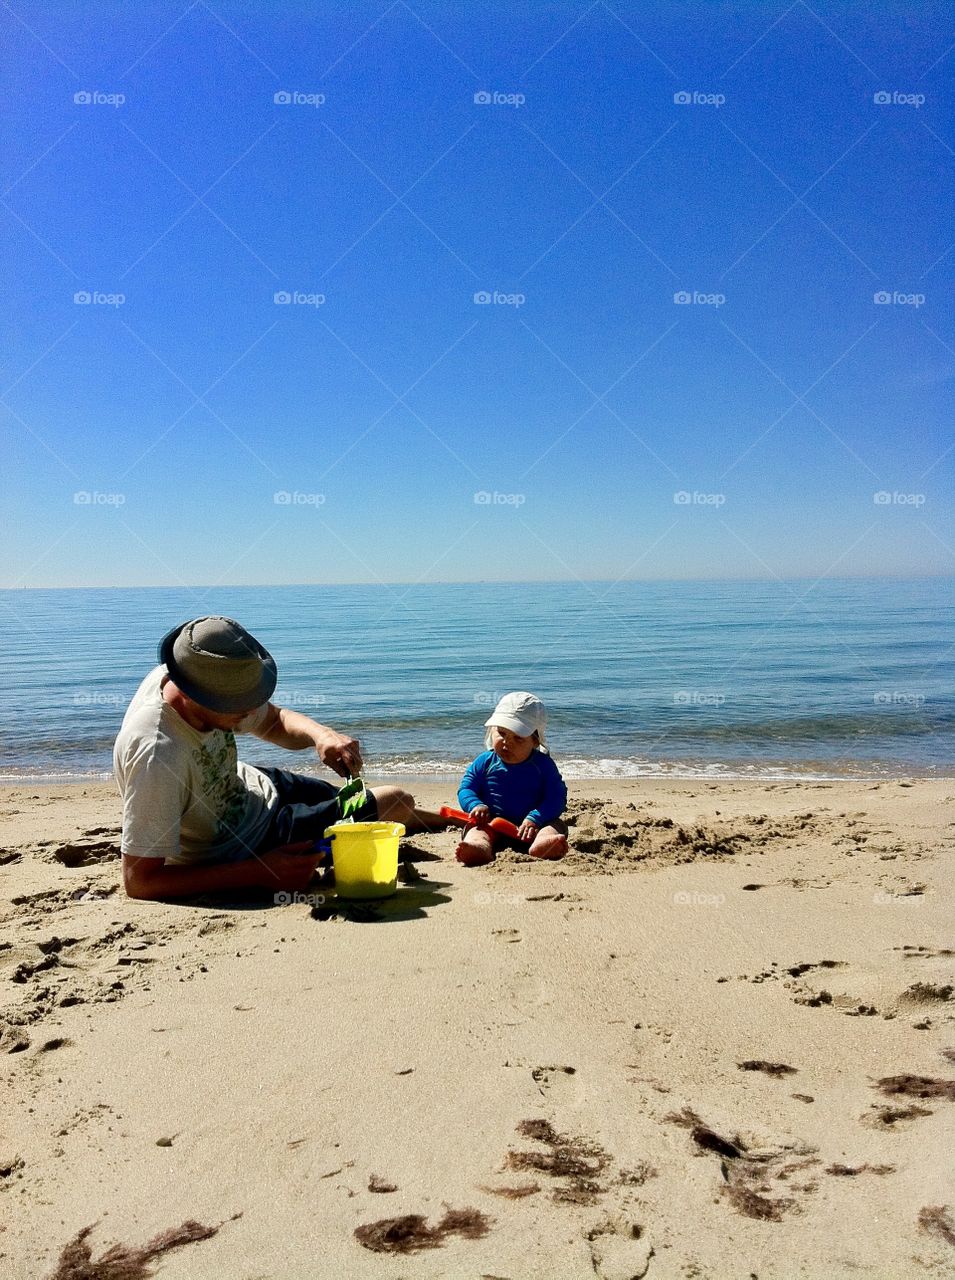 Dad and toddler playing at the beach, Sweden 